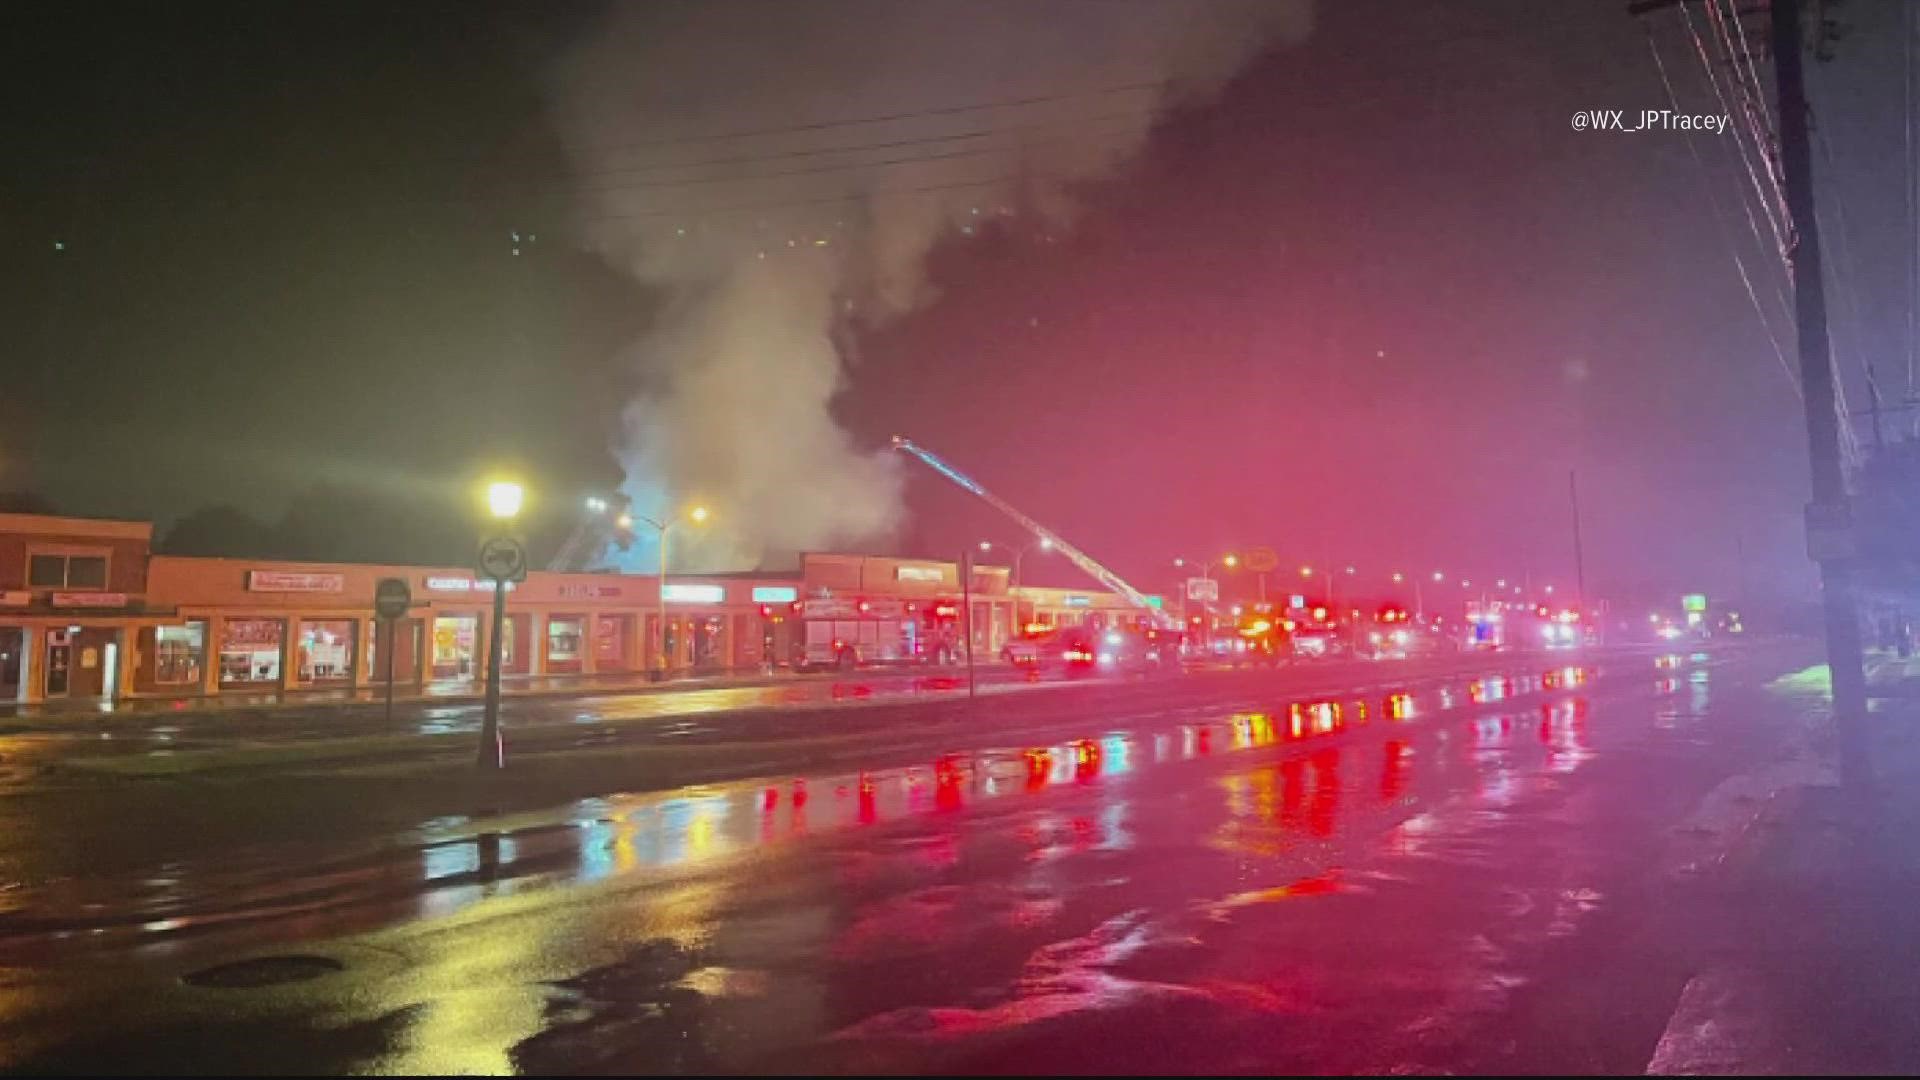 Frederick County and Rescue crews were called to the scene of a two-alarm fire in a strip mall that broke out early Wednesday morning.